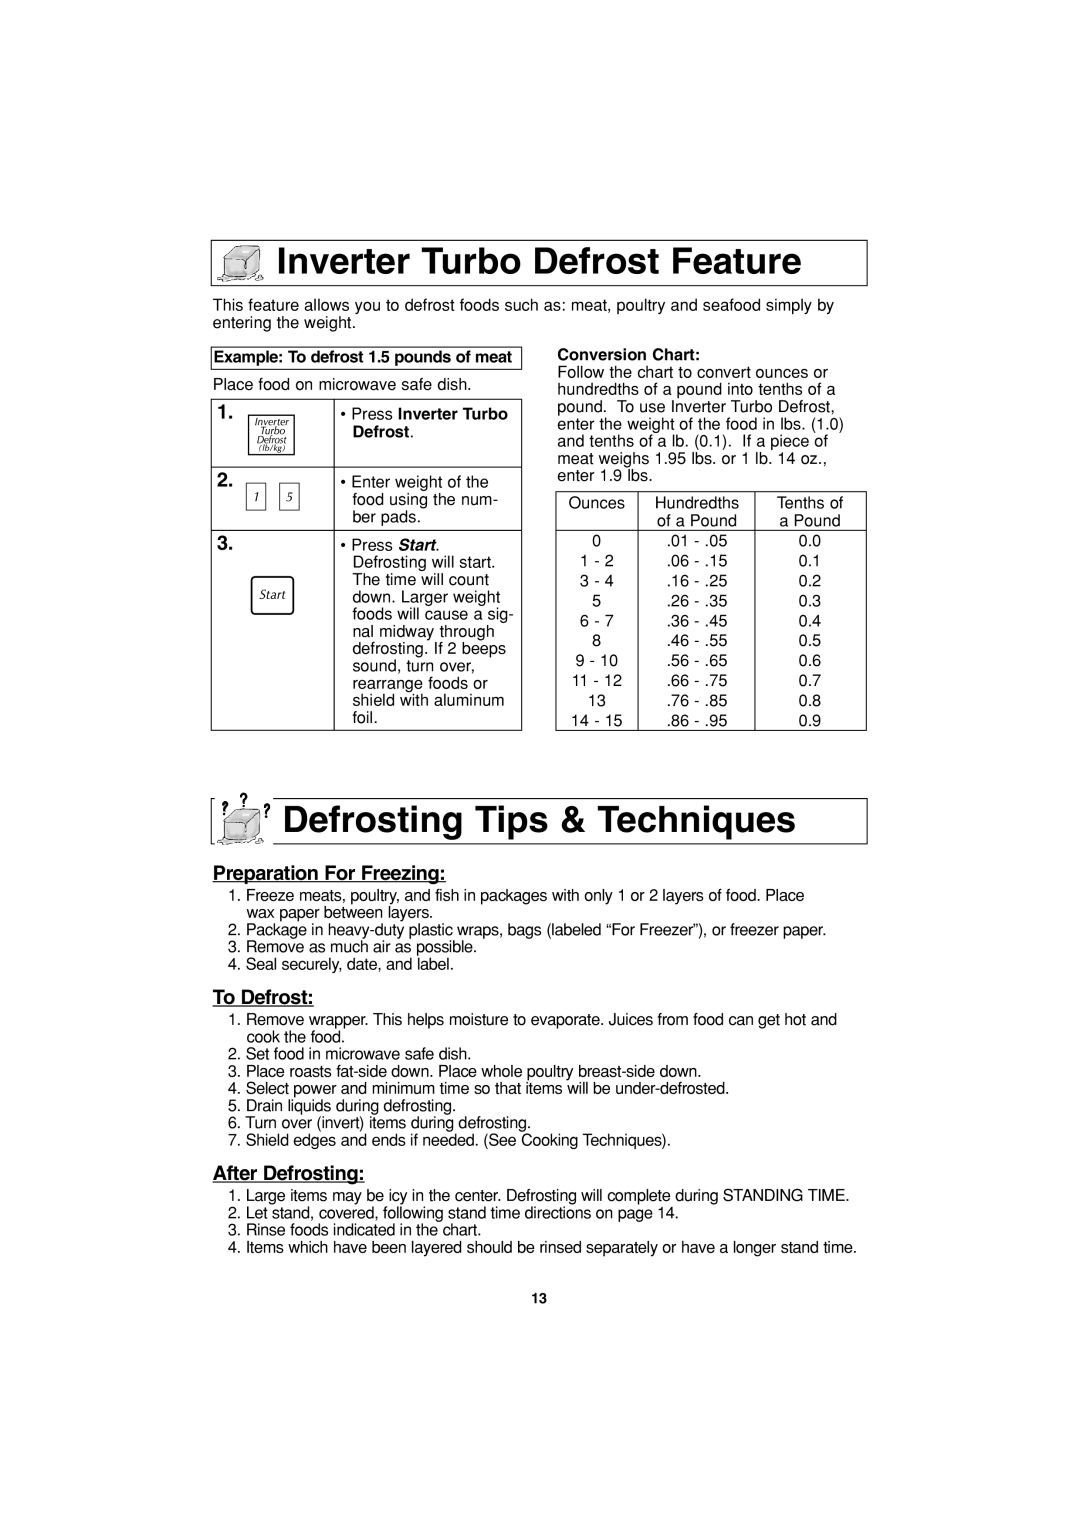 Panasonic NN-S503 Inverter Turbo Defrost Feature, Defrosting Tips & Techniques, Preparation For Freezing, To Defrost 